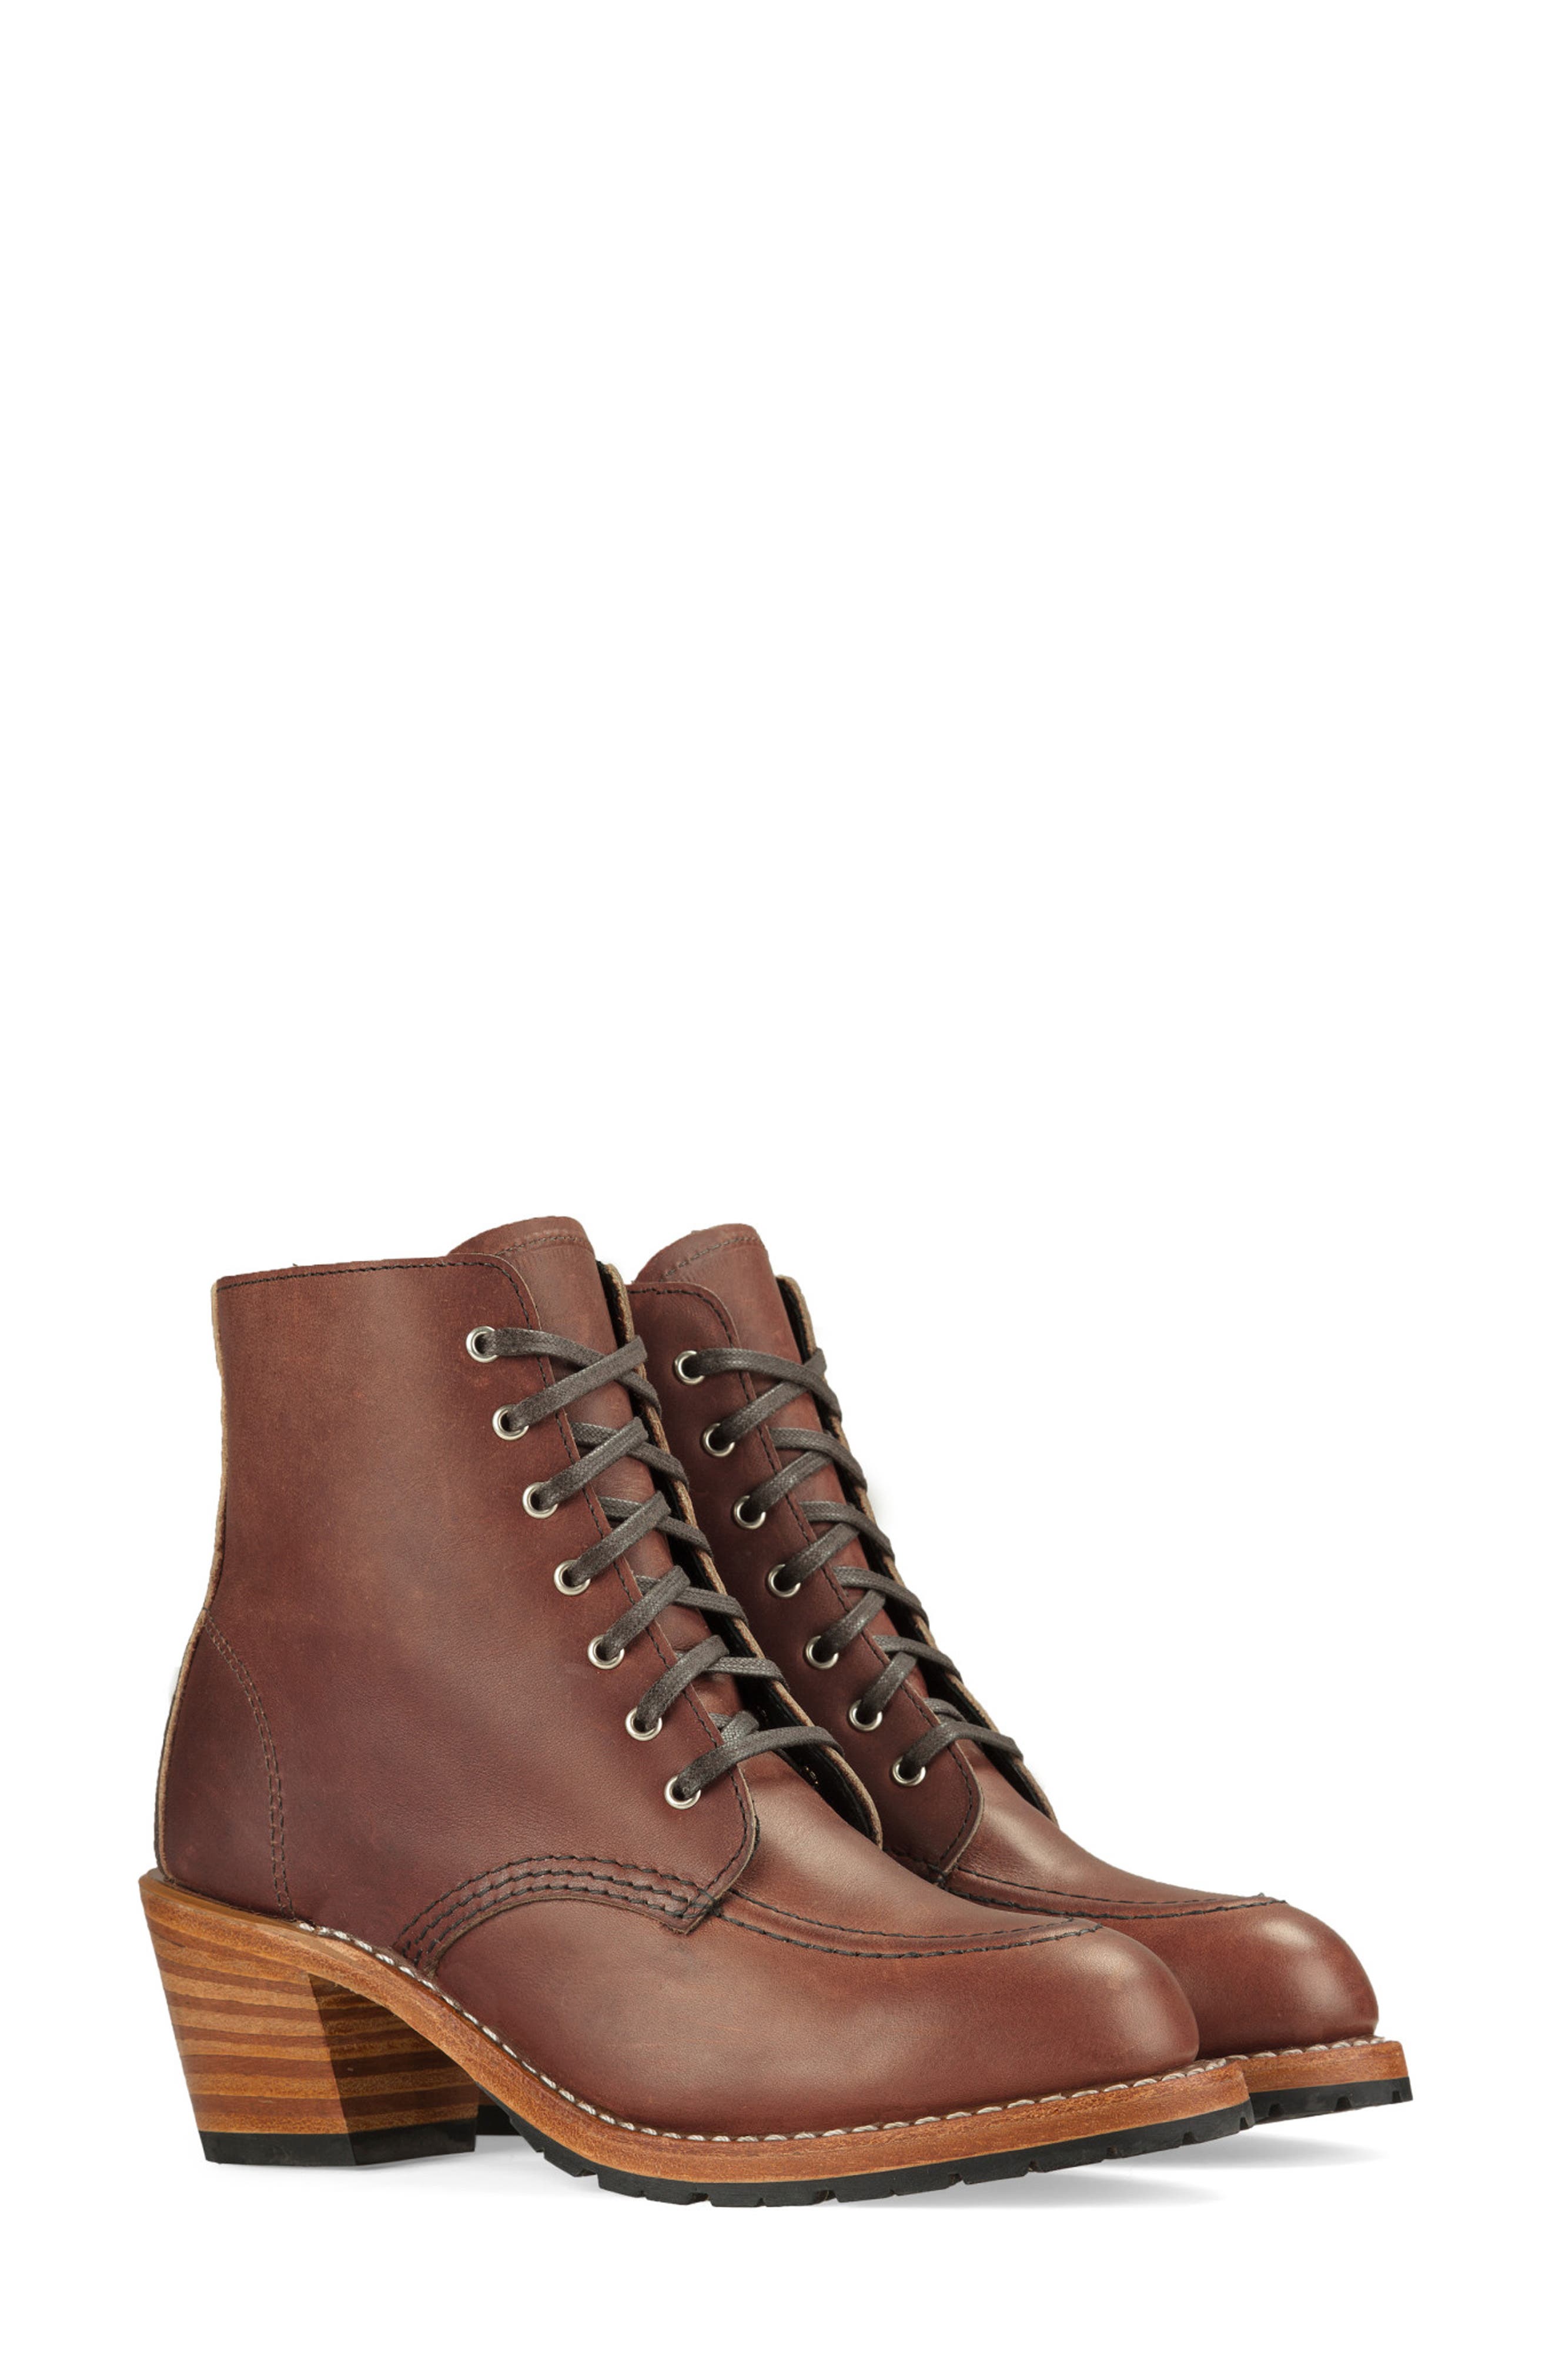 madewell red wing